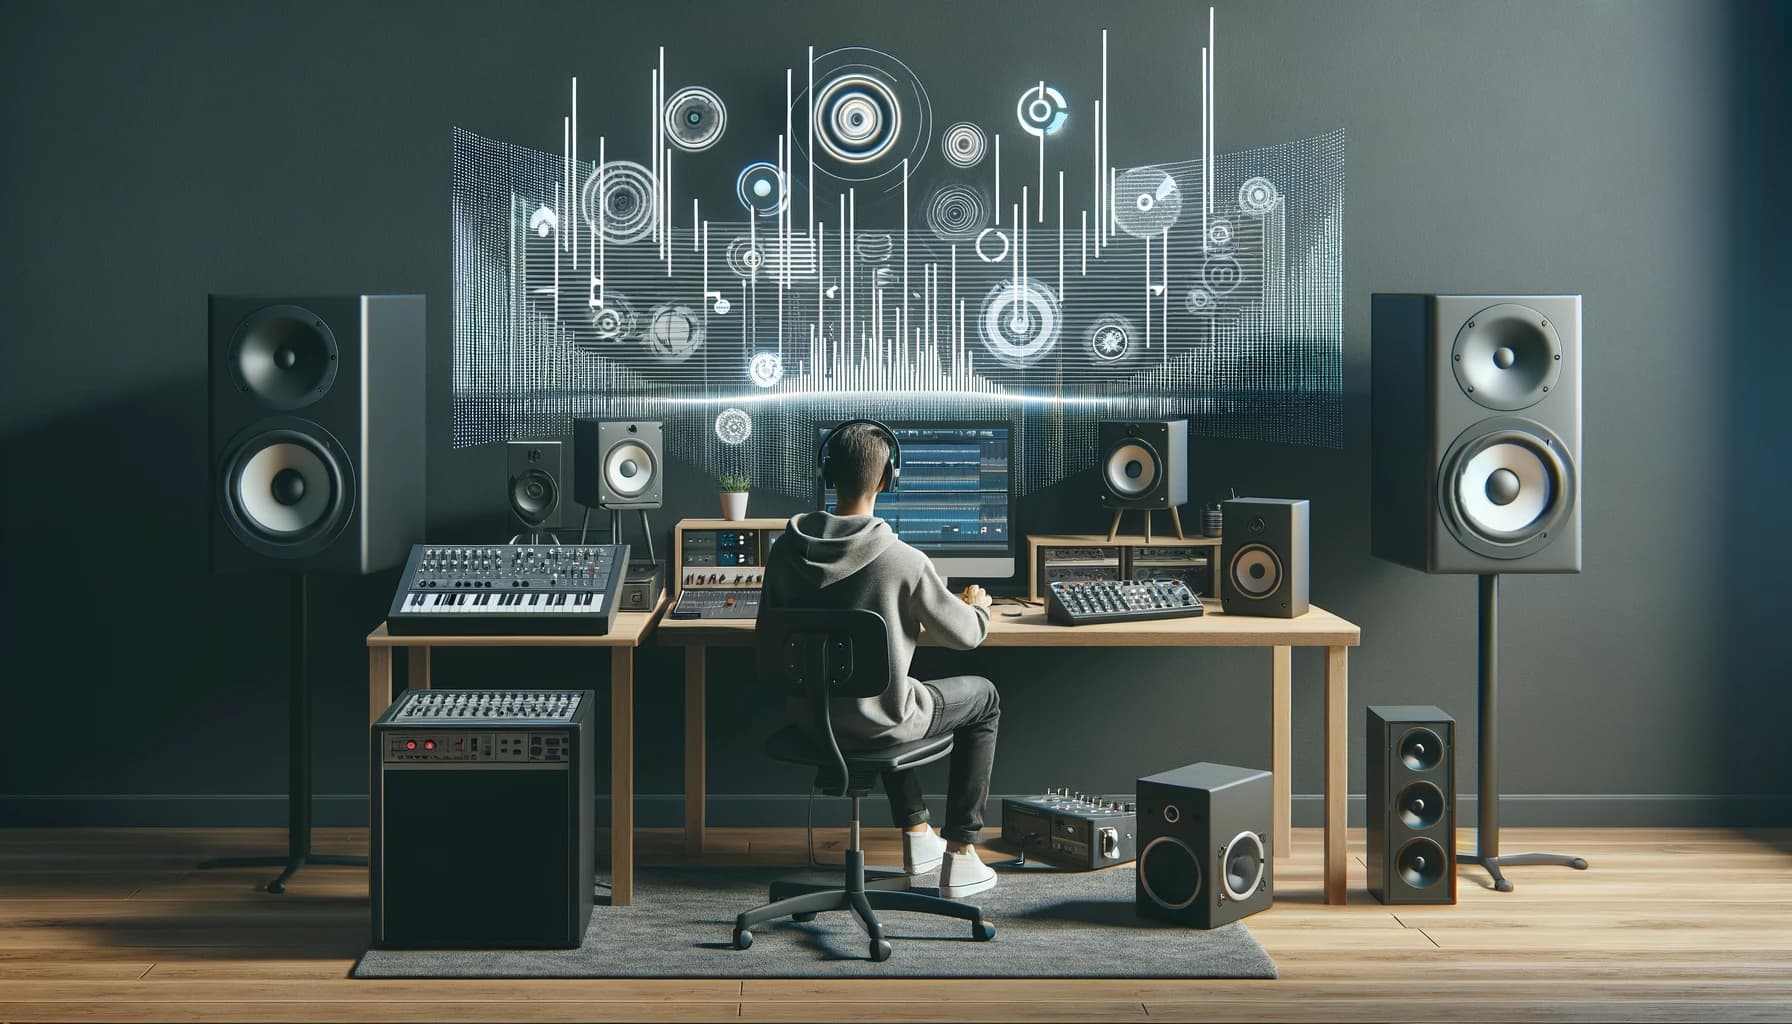 A wide image showing a compact home studio setup designed for producing immersive audio.